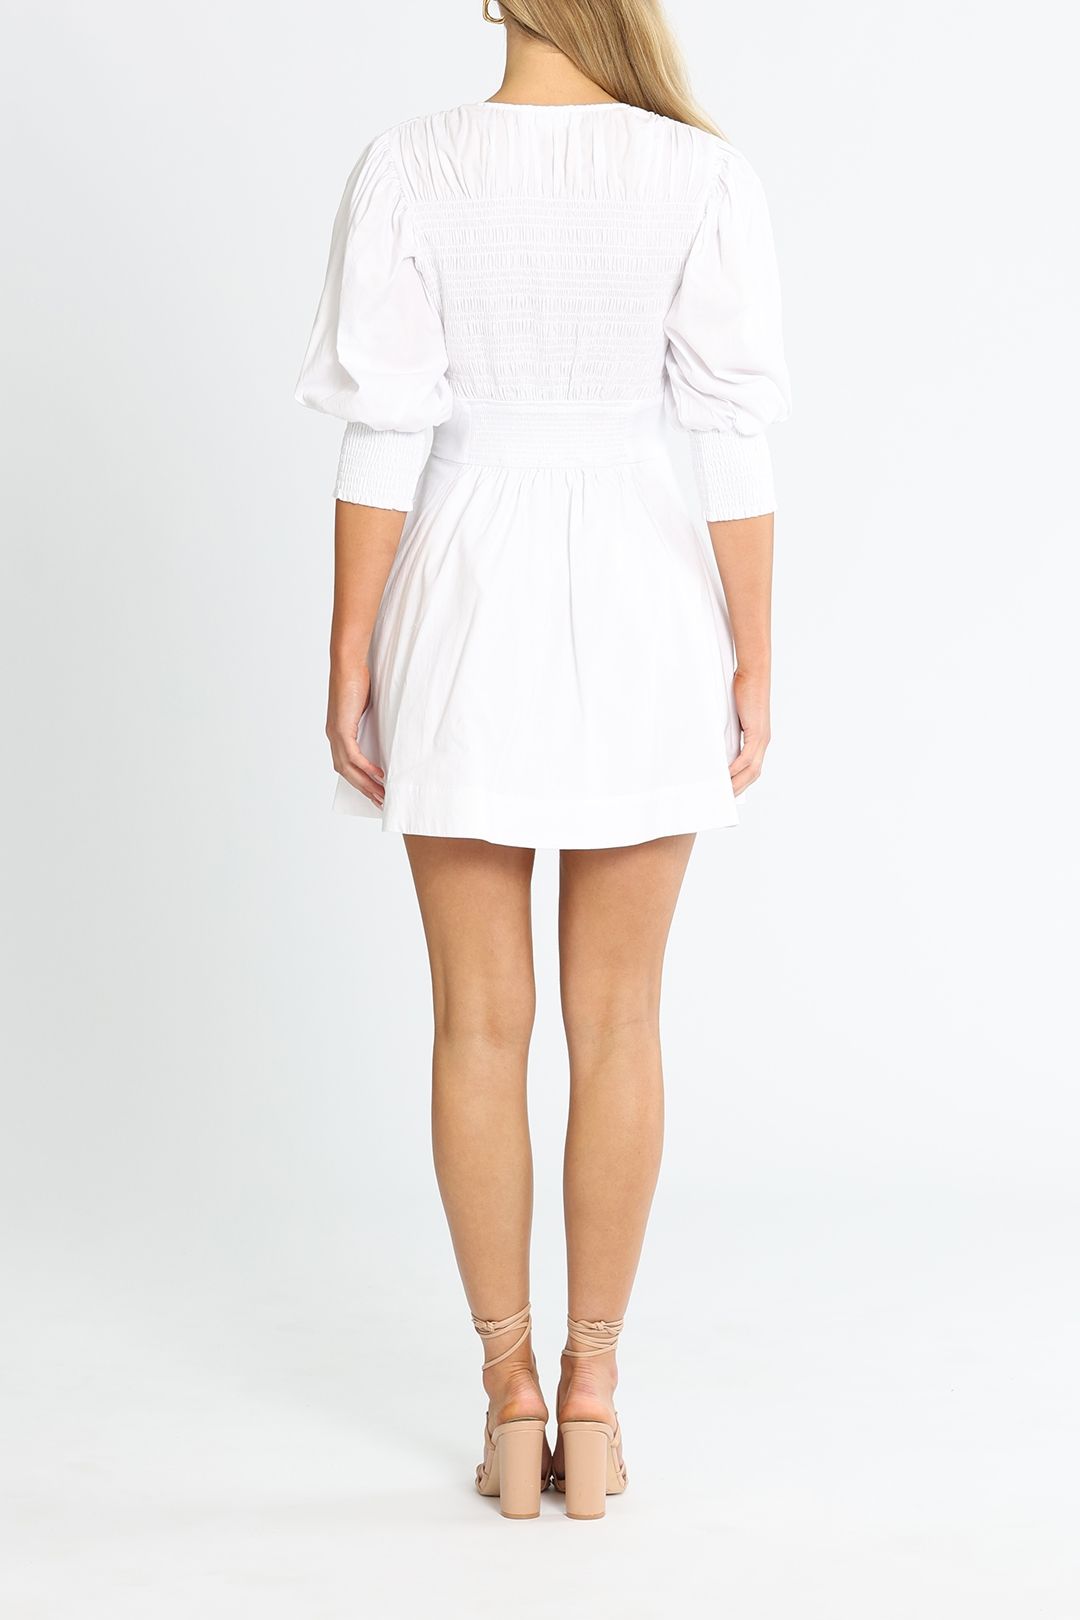 Belle and Bloom New Paradise Dress White Mini